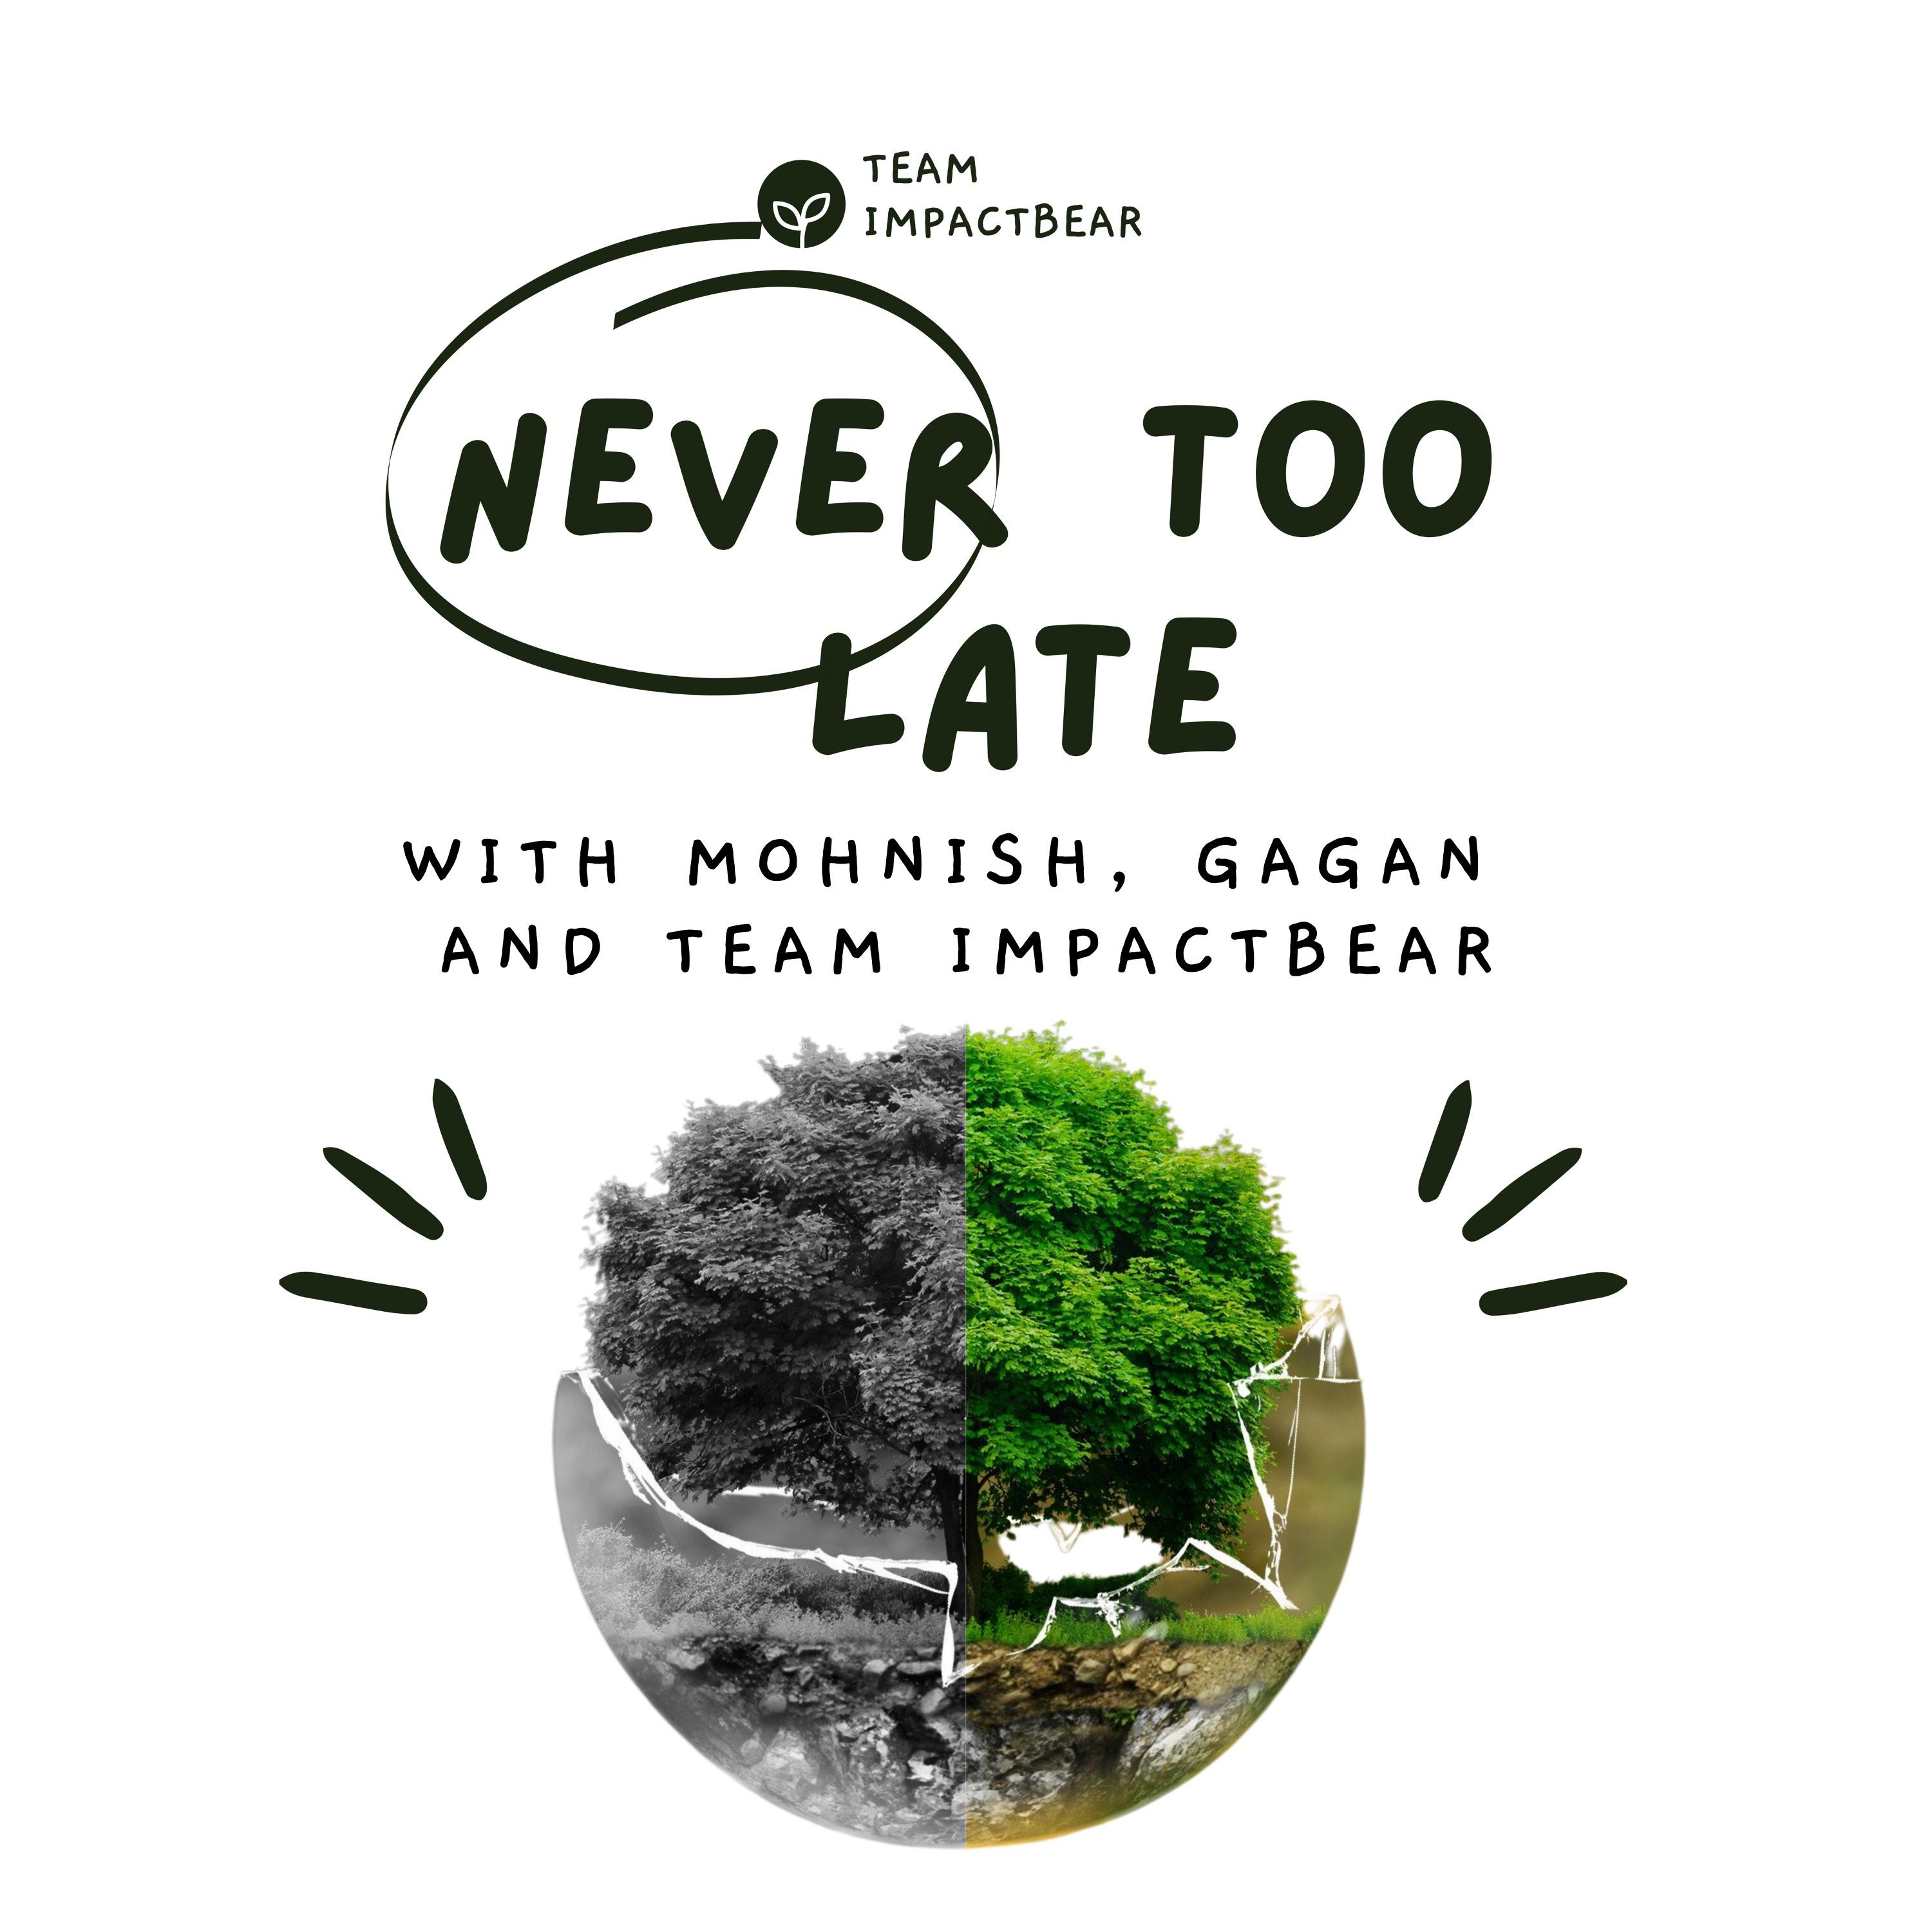 Never Too Late with Mohnish, Gagan and Team Impactbear